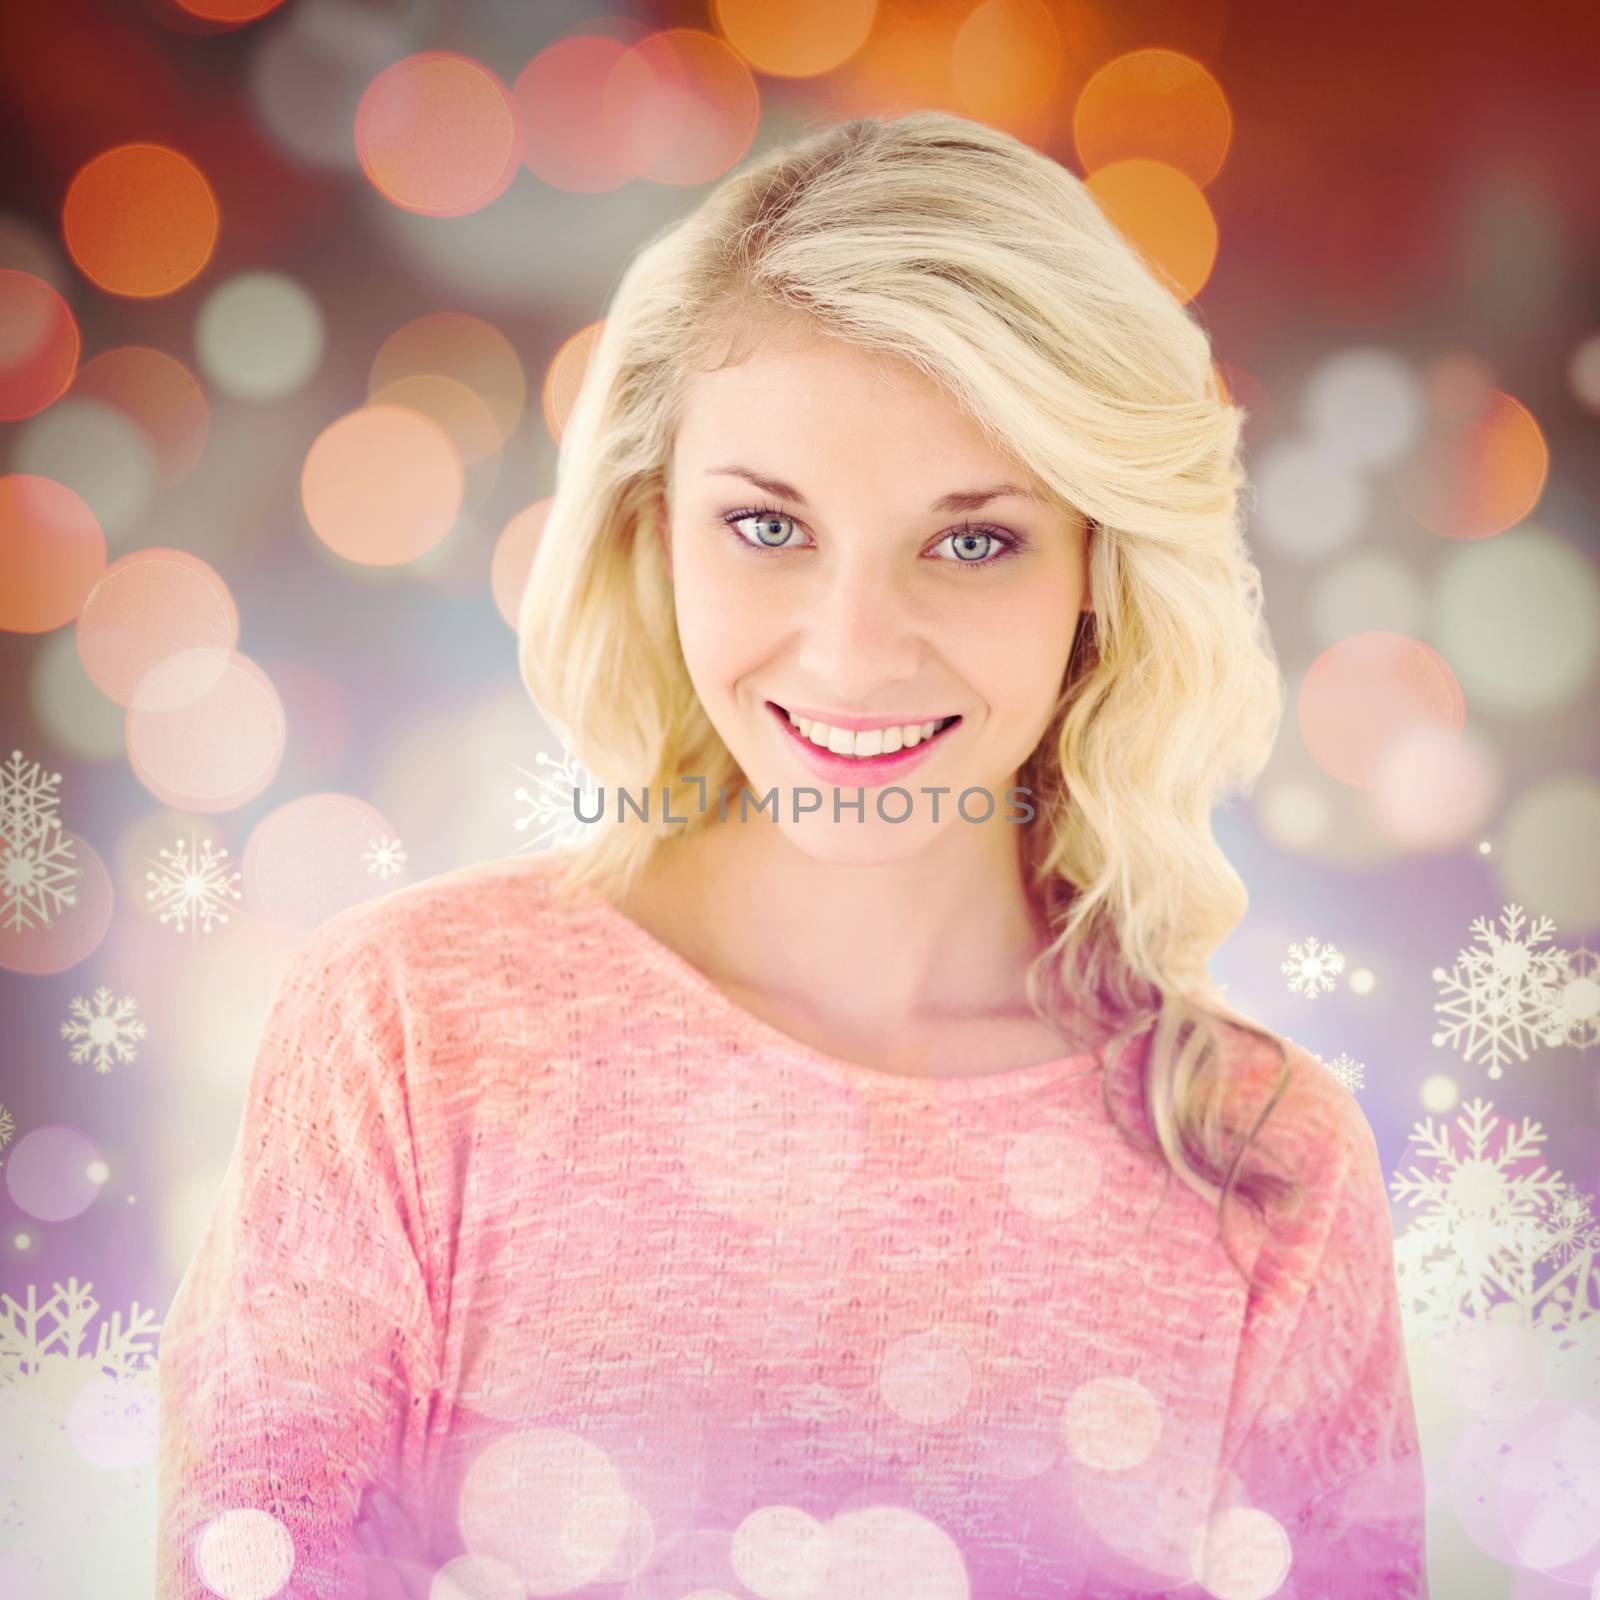 Pretty blonde smiling with arms crossed against snowflake pattern